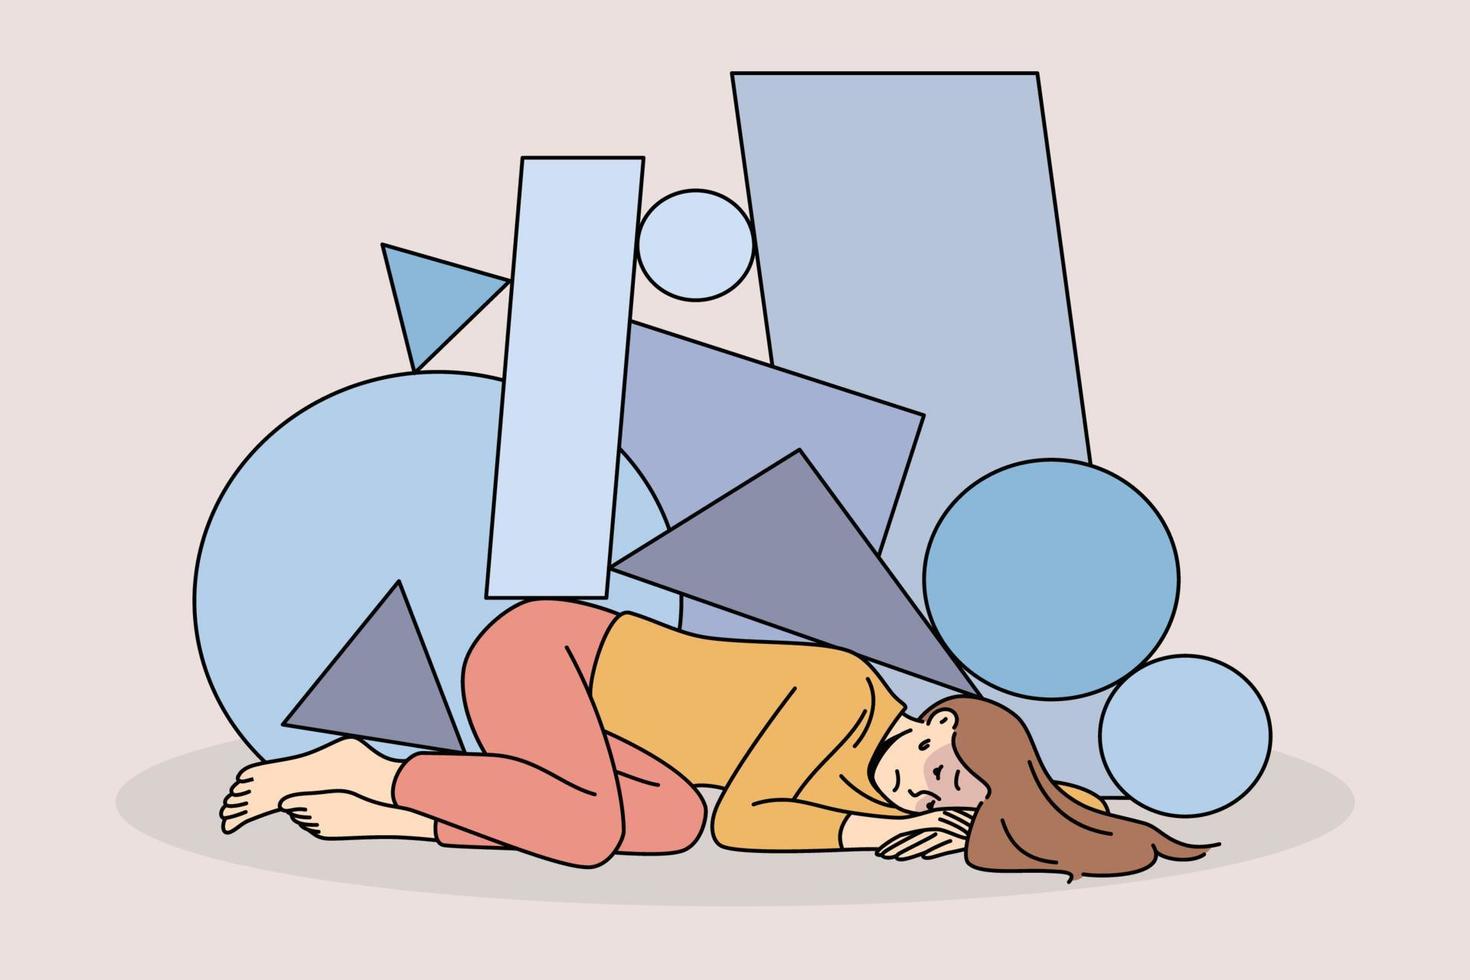 Unhappy stressed young woman immobile under life troubles burden. Upset girl distressed with psychological or mental problems. Depression and stress concept. Vector illustration.